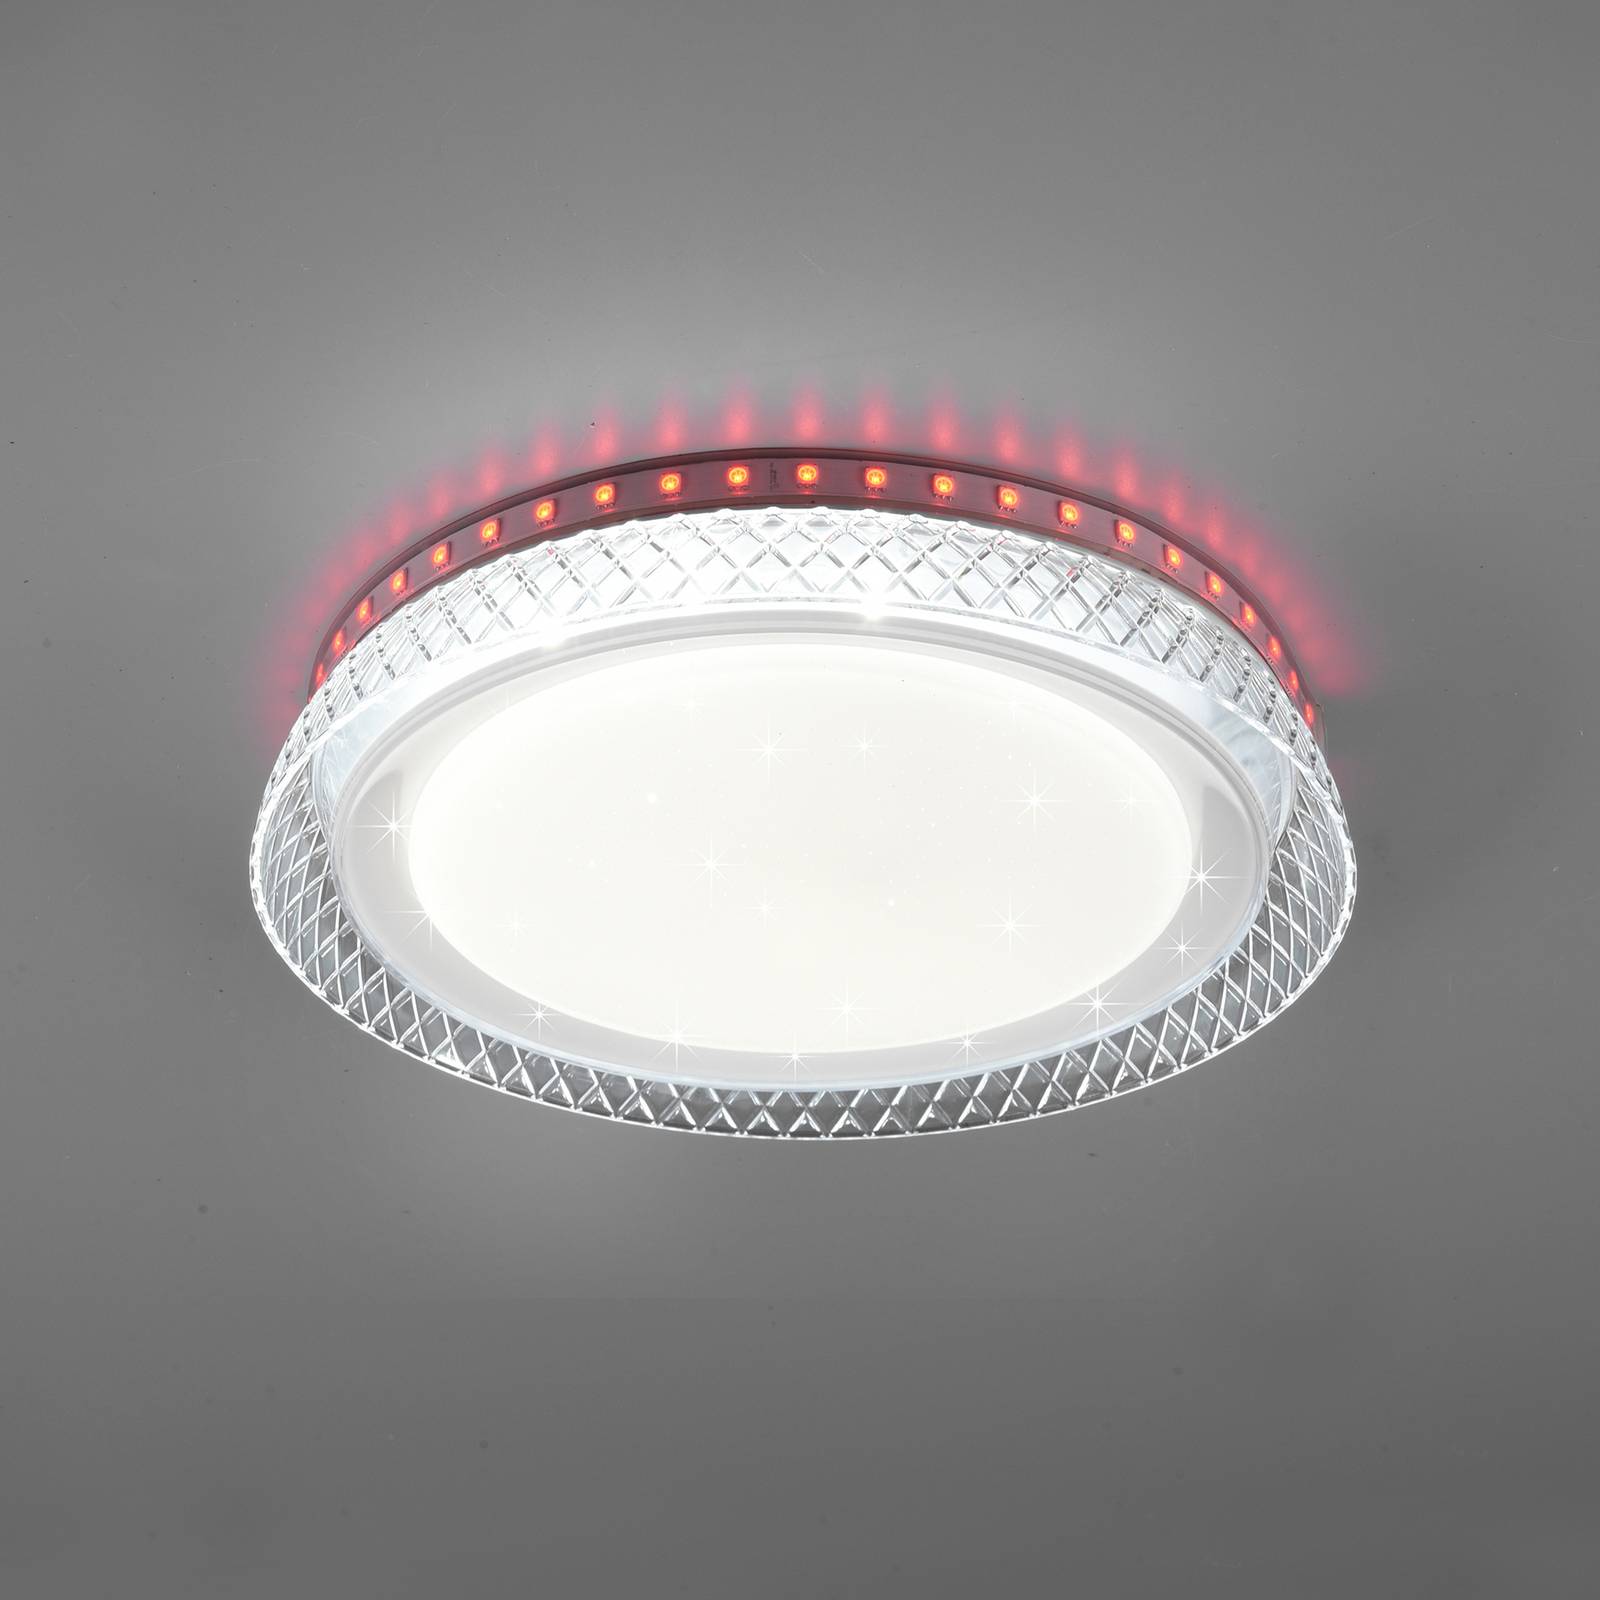 reality leuchten plafonnier led thea, rvb, cct, dimmable